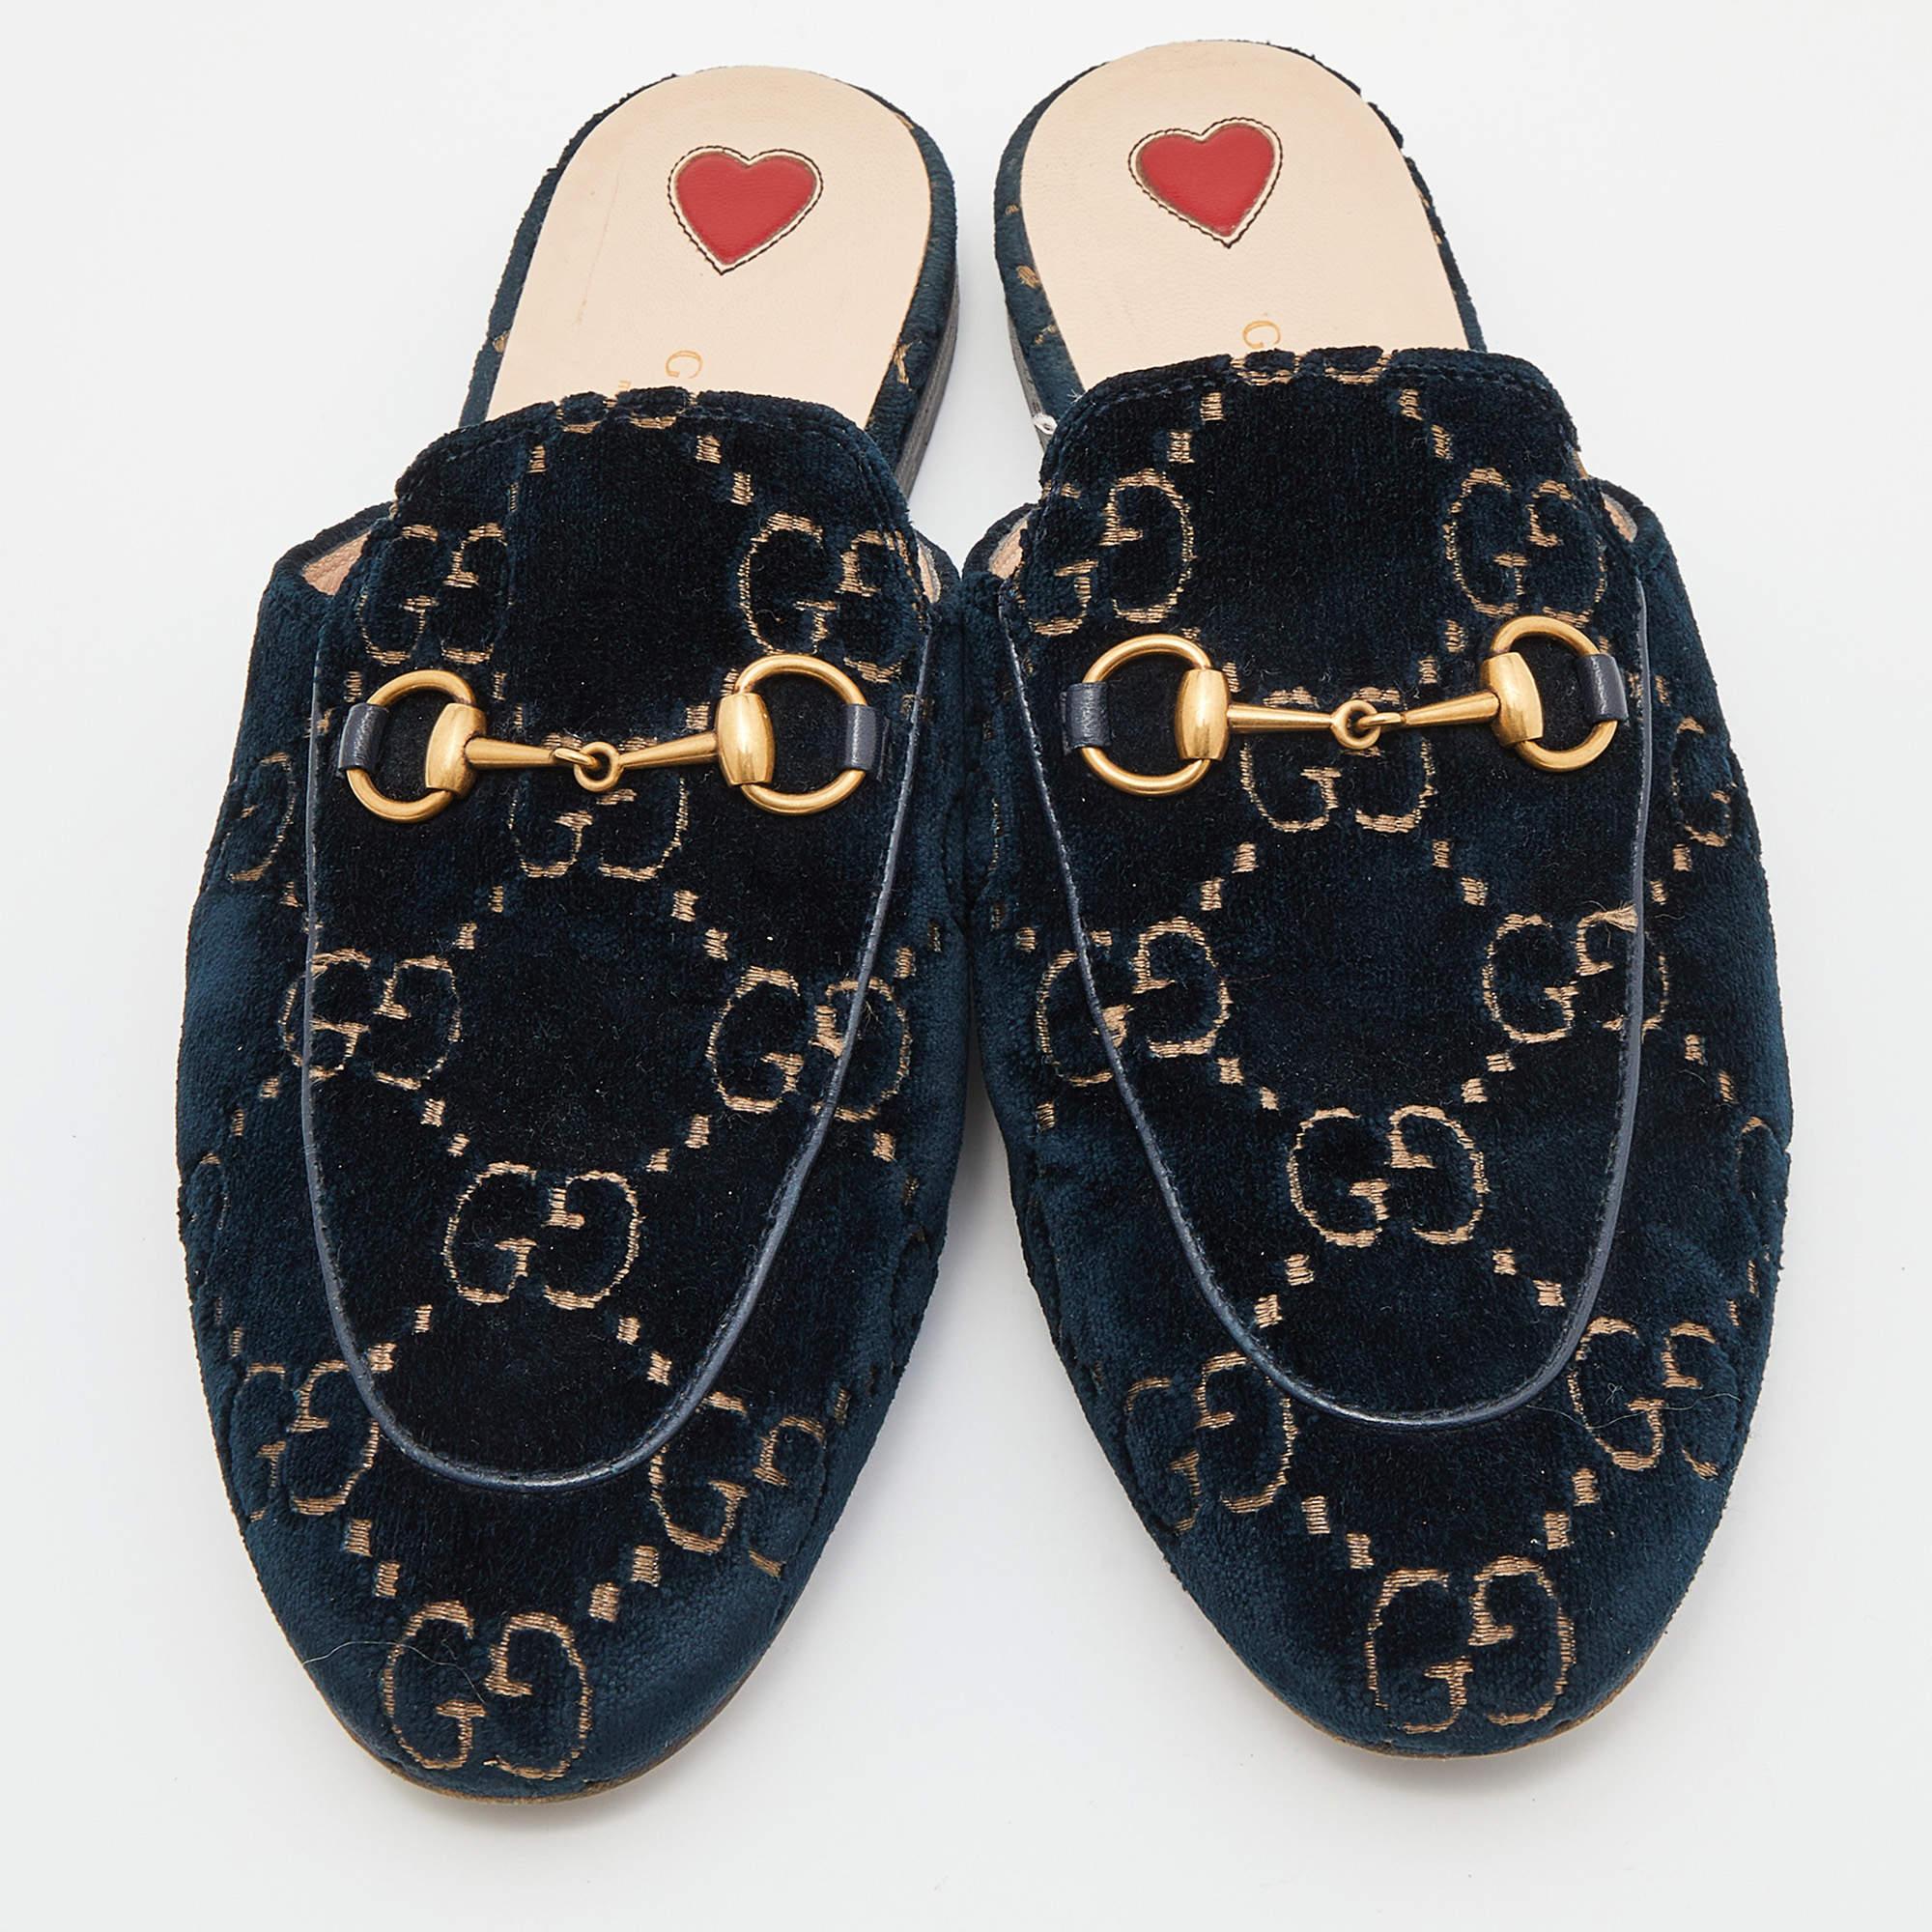 These Gucci Princetown mules signify luxury and practicality. An ultimate favorite of style enthusiasts, its silhouette has the luxe touch of the Horsebit motif on the uppers. It comes made from GG velvet.

